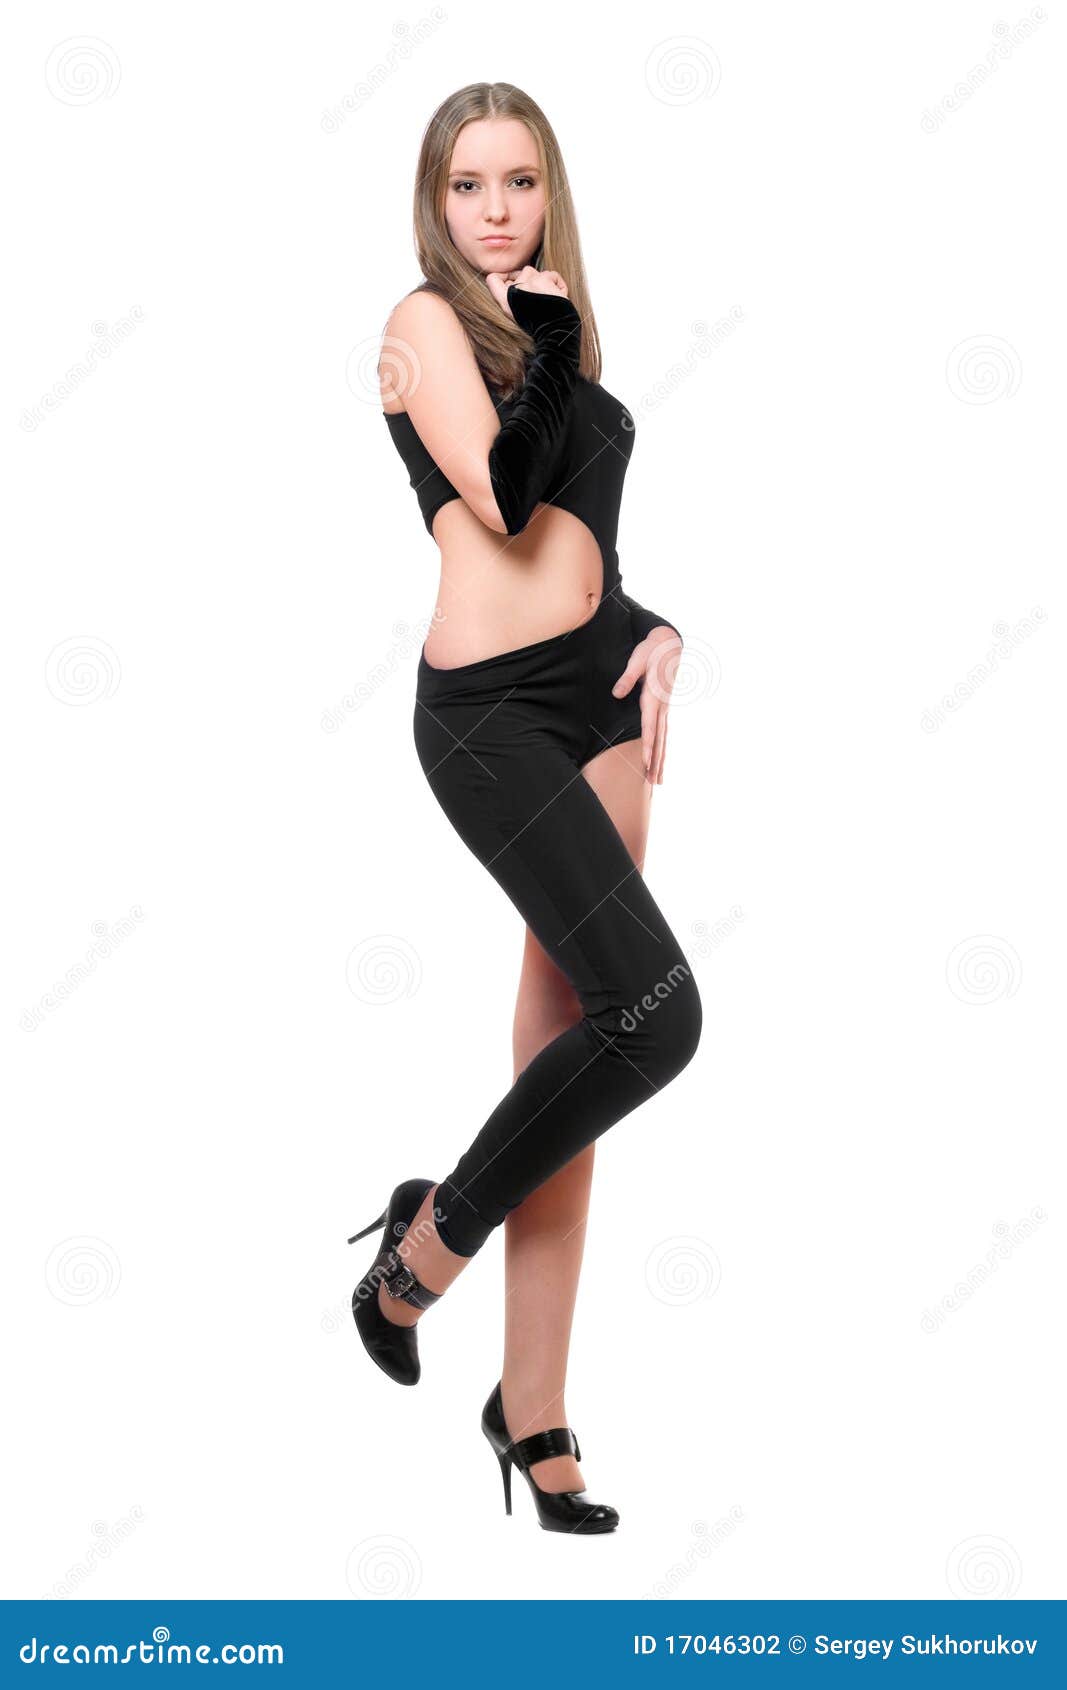 playful young woman in skintight black costume